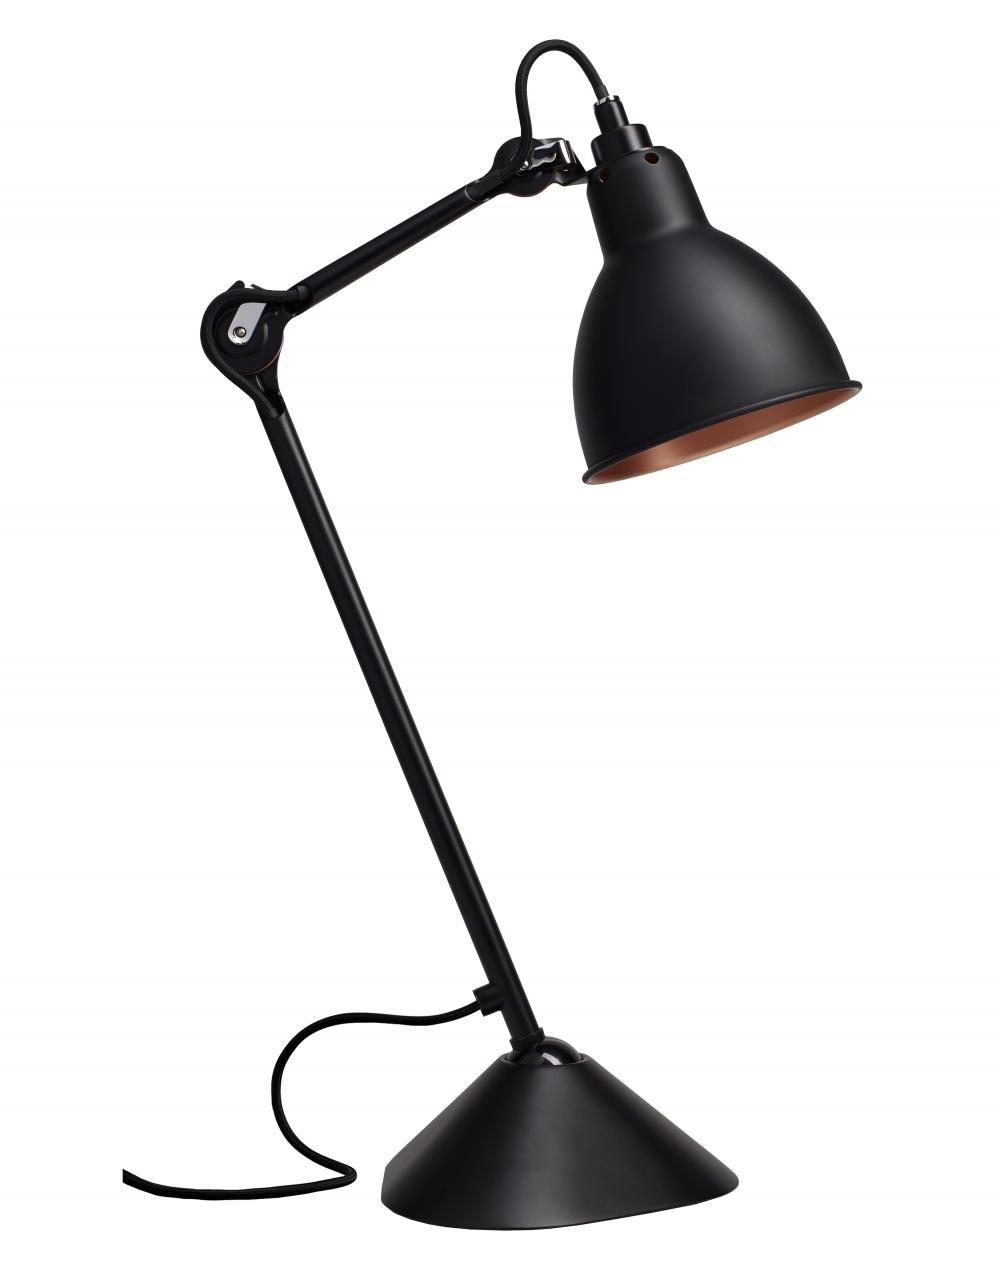 Lampe Gras 205 Table Lamp Satin Black Arm Black Shade With Copper Interior Round